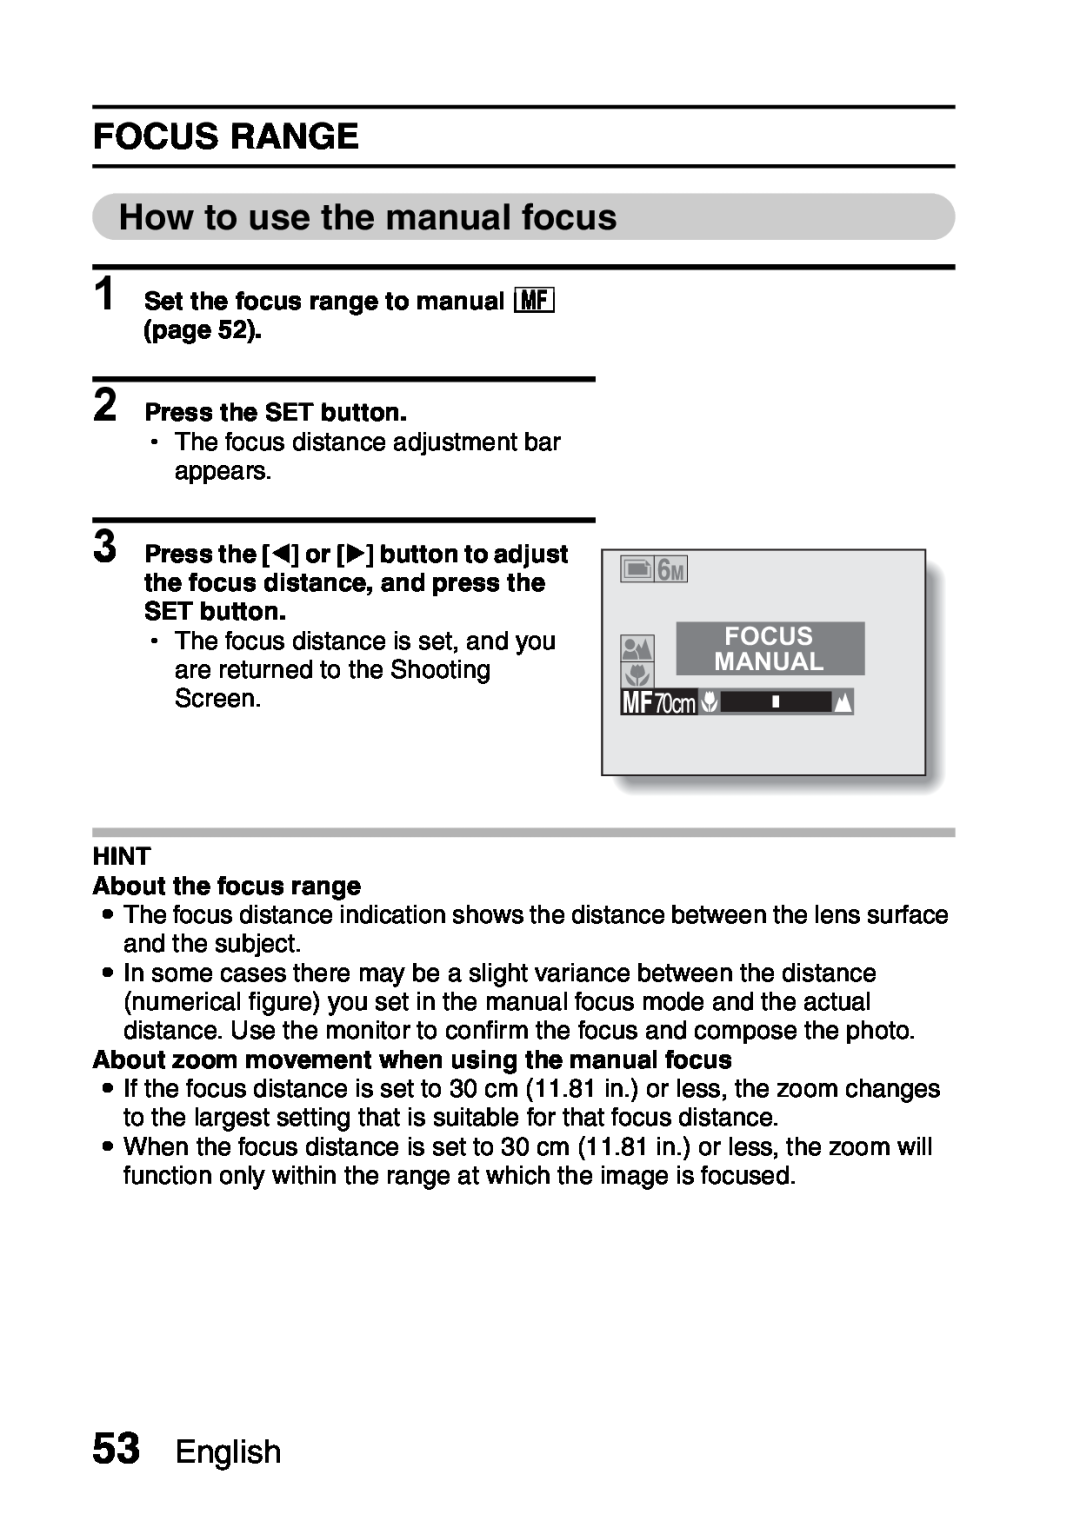 Sanyo VPC-S60 FOCUS RANGE How to use the manual focus, English, Set the focus range to manual page, Manual 